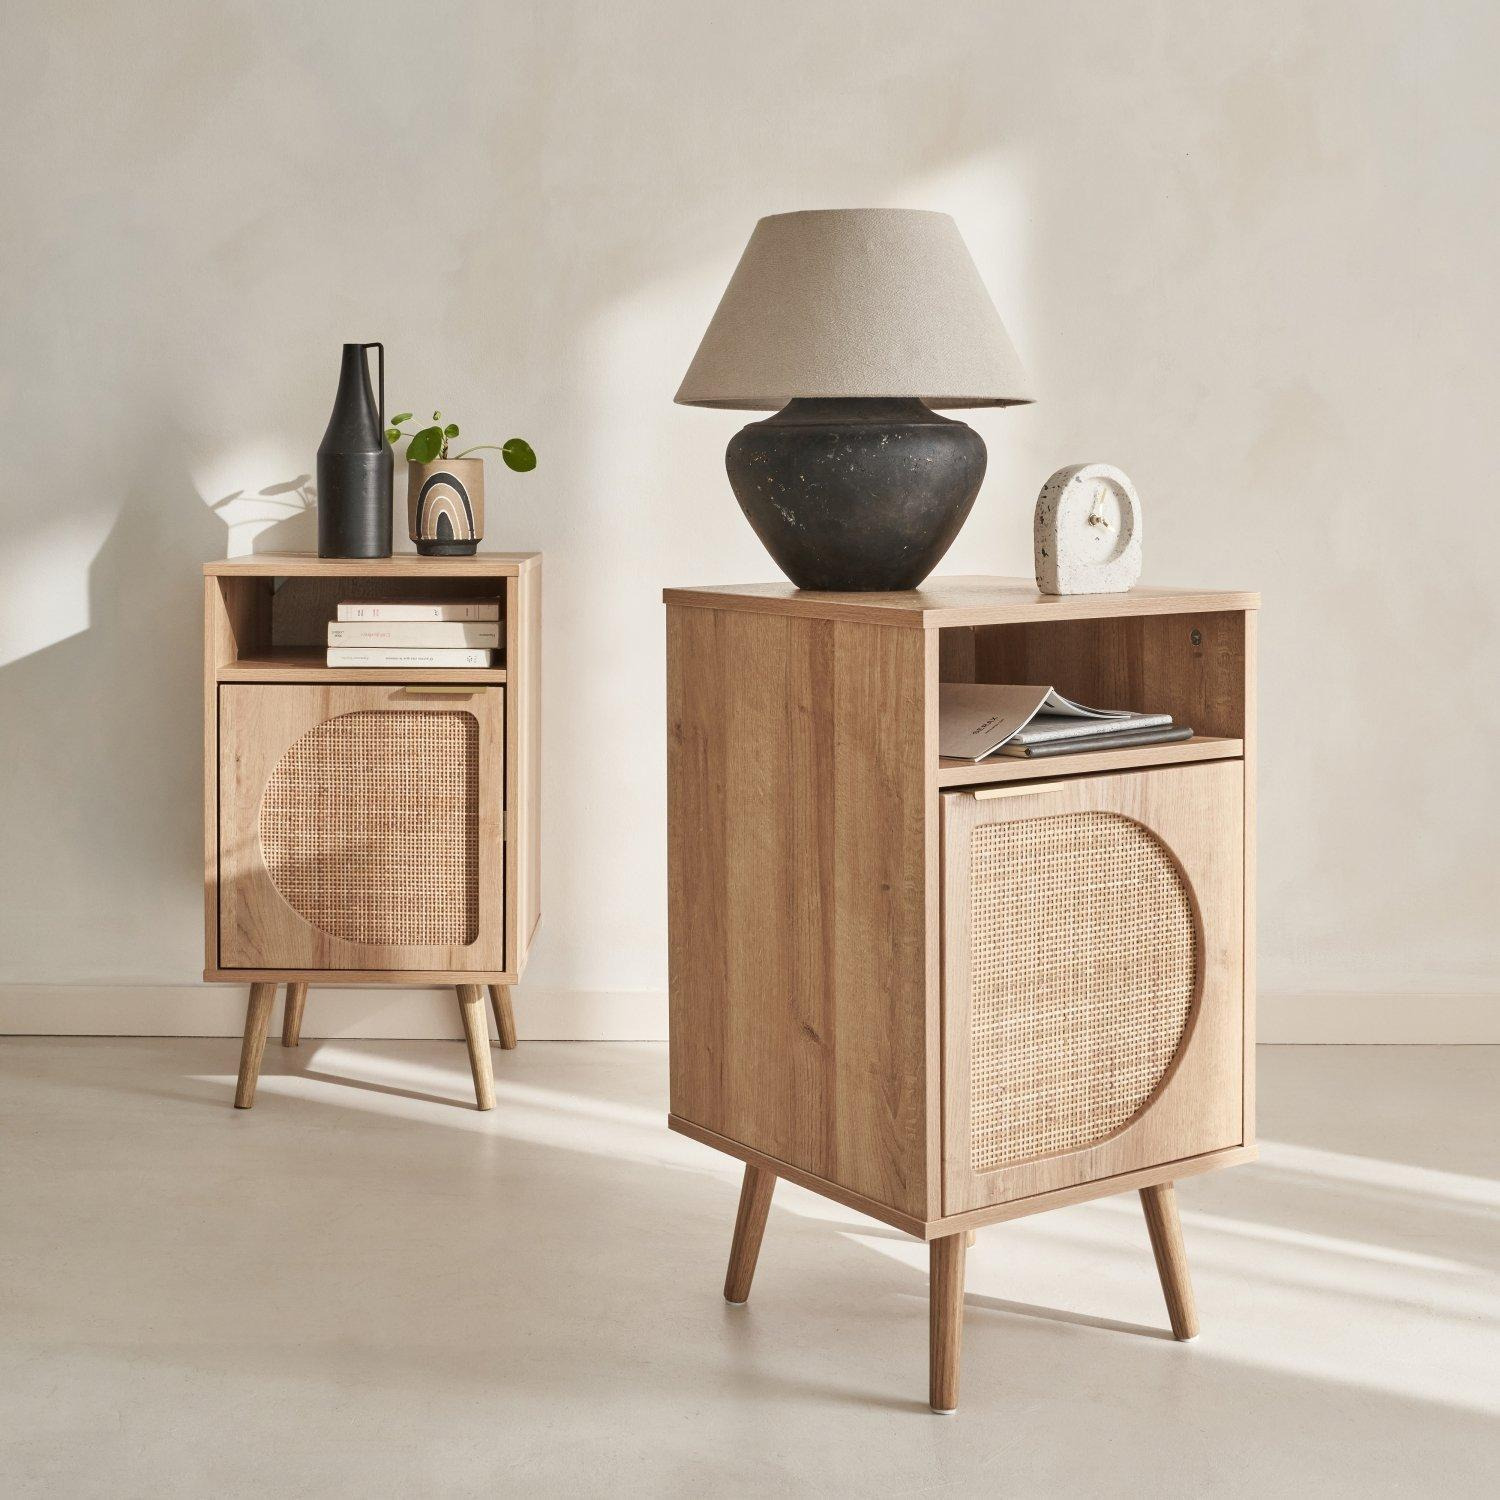 Pair Of Wood And Rounded Cane Rattan Bedside Tables - image 1